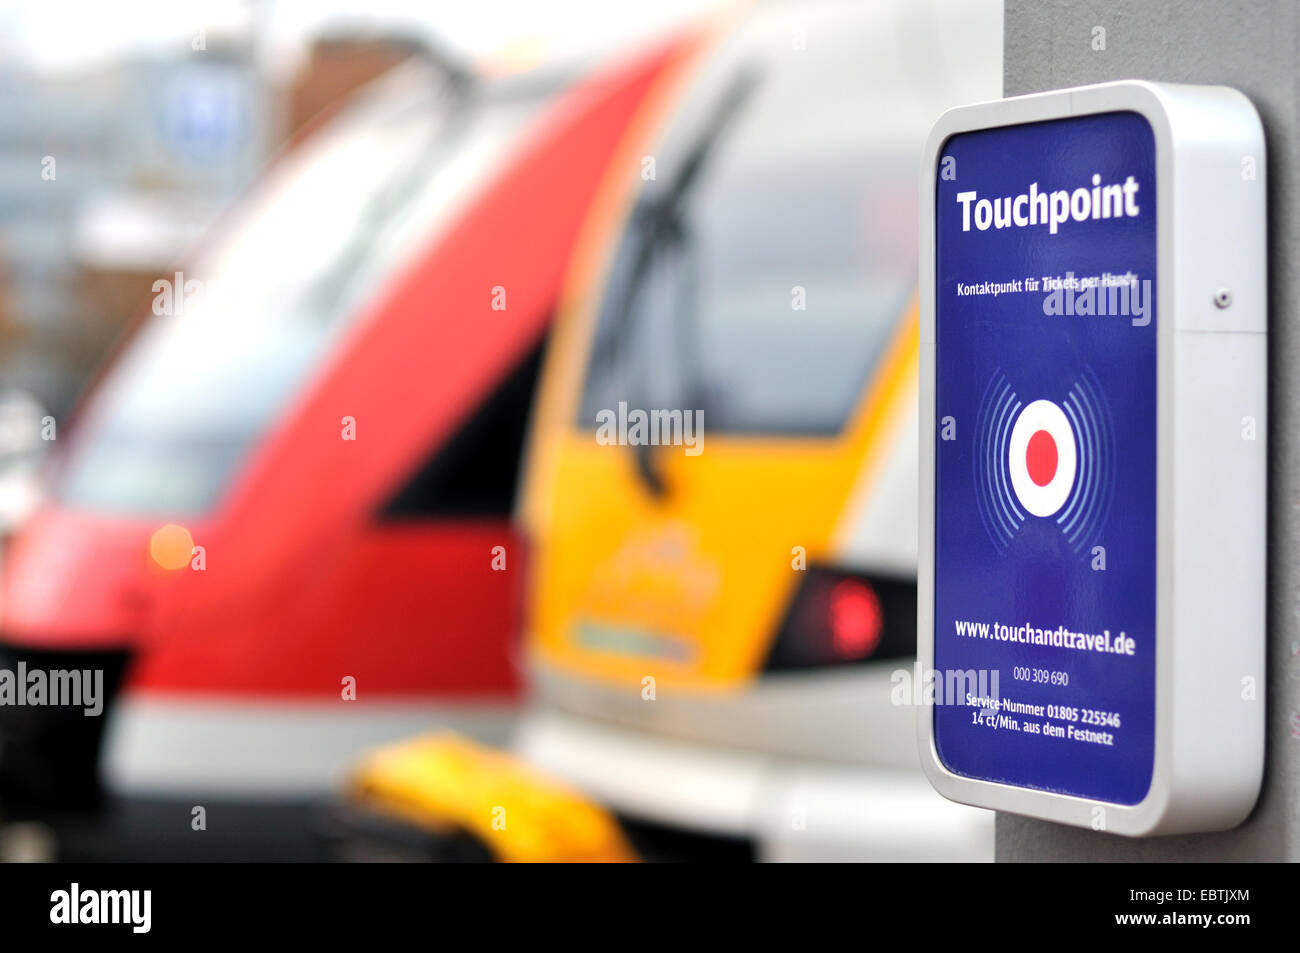 touchpoint at train plattform, two trains in background, Germany Stock Photo